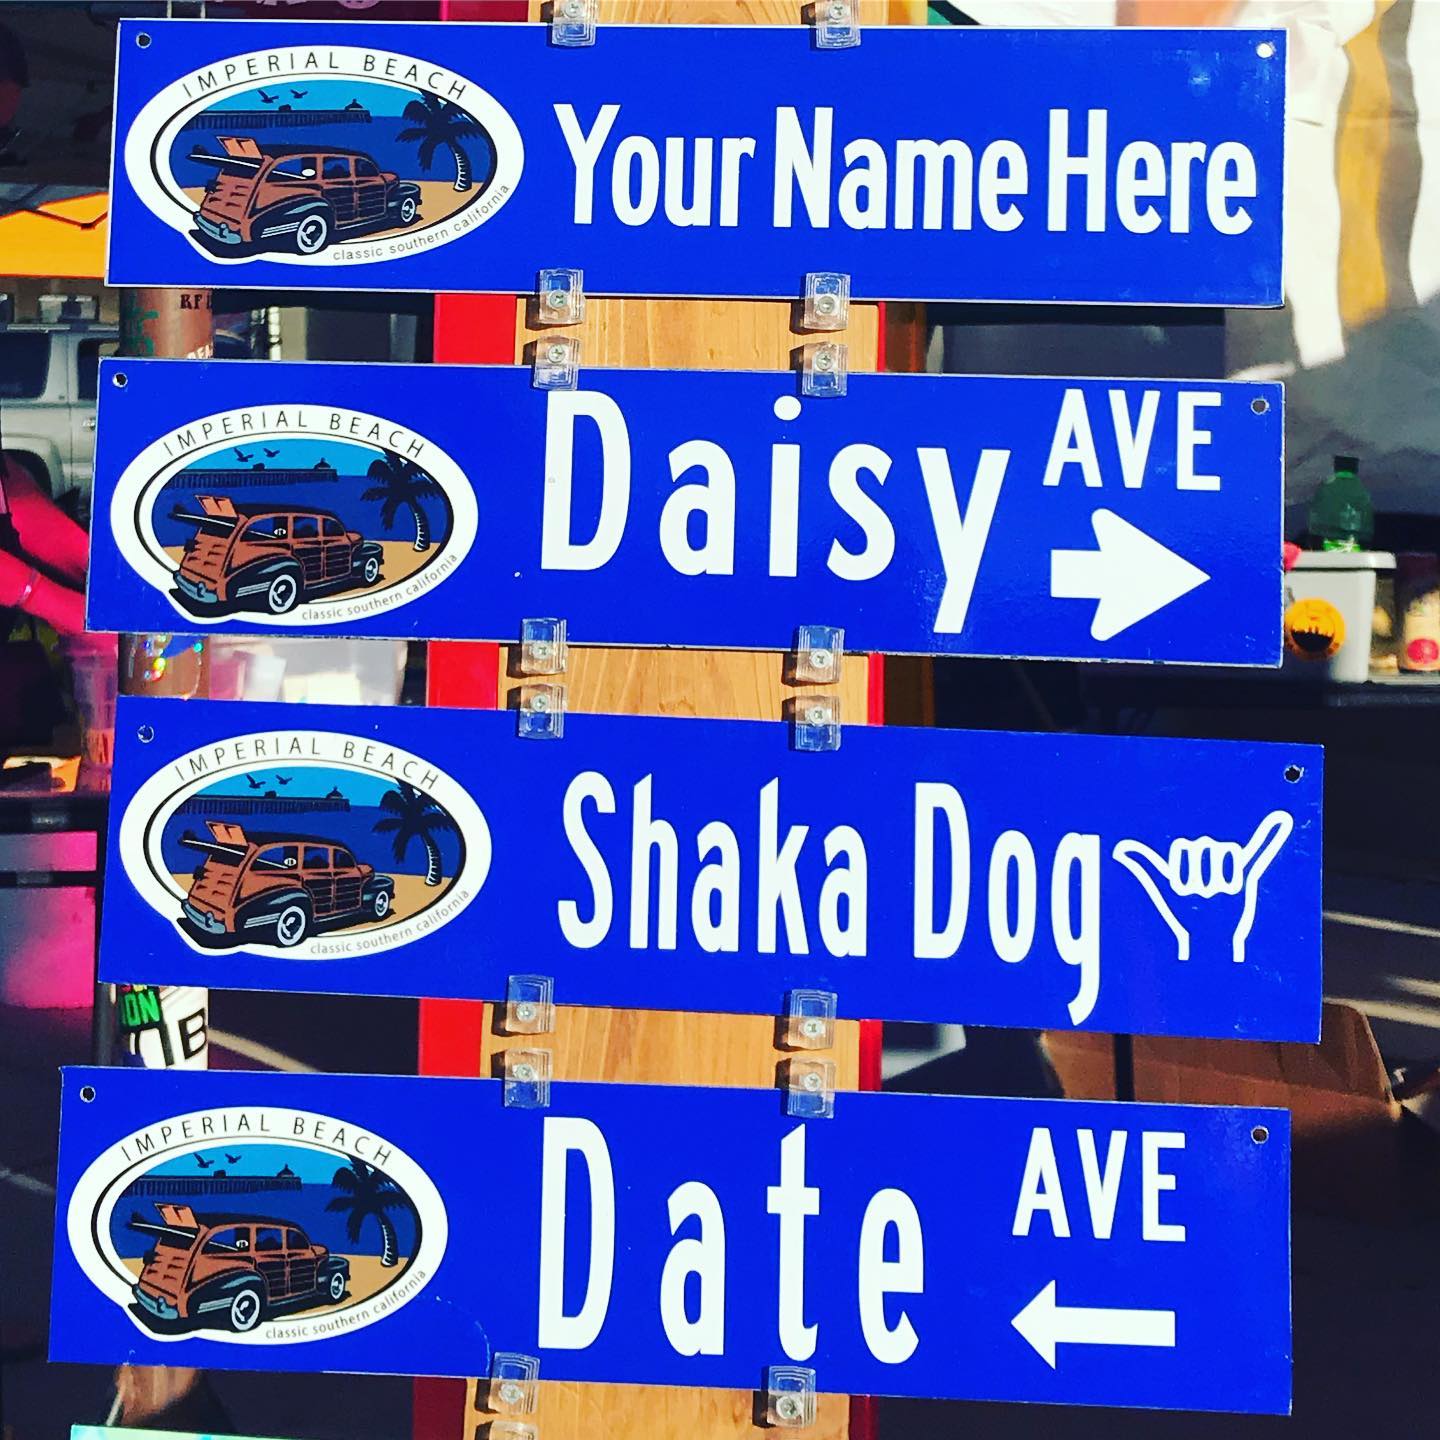 Blue signs reading, "Your Name Here," "Daisy Ave," Shaka Dog," and Date Ave."